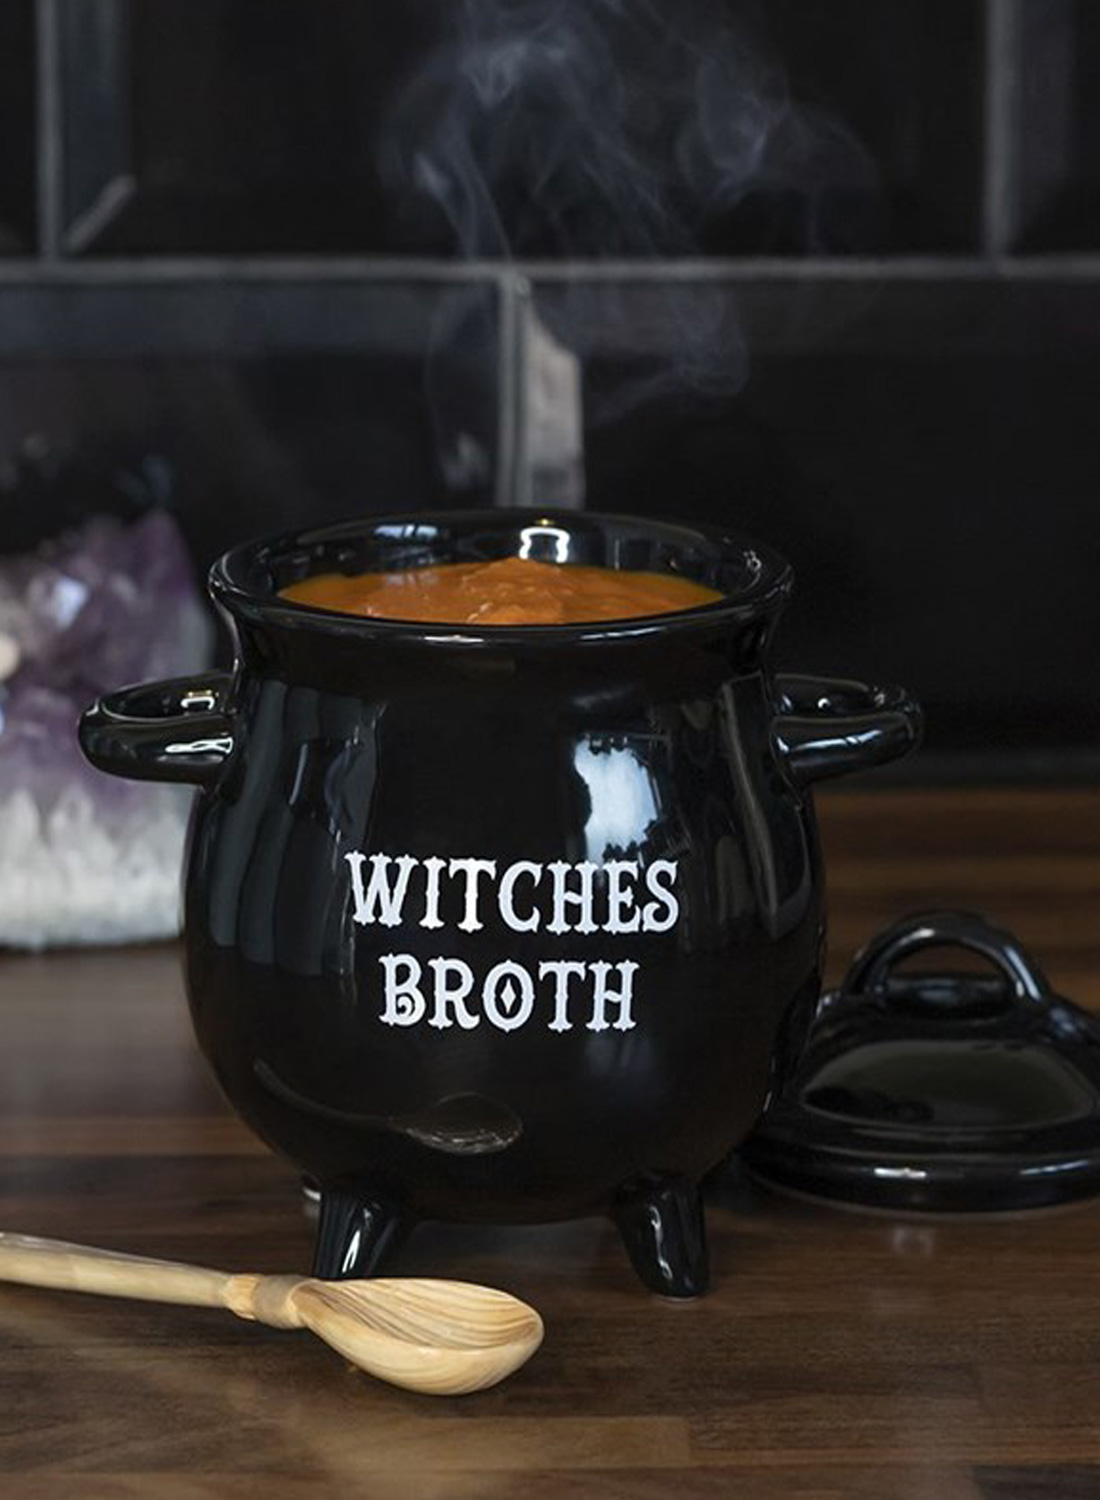 Witches Broth Cauldron Soup Bowl With Broom Spoon